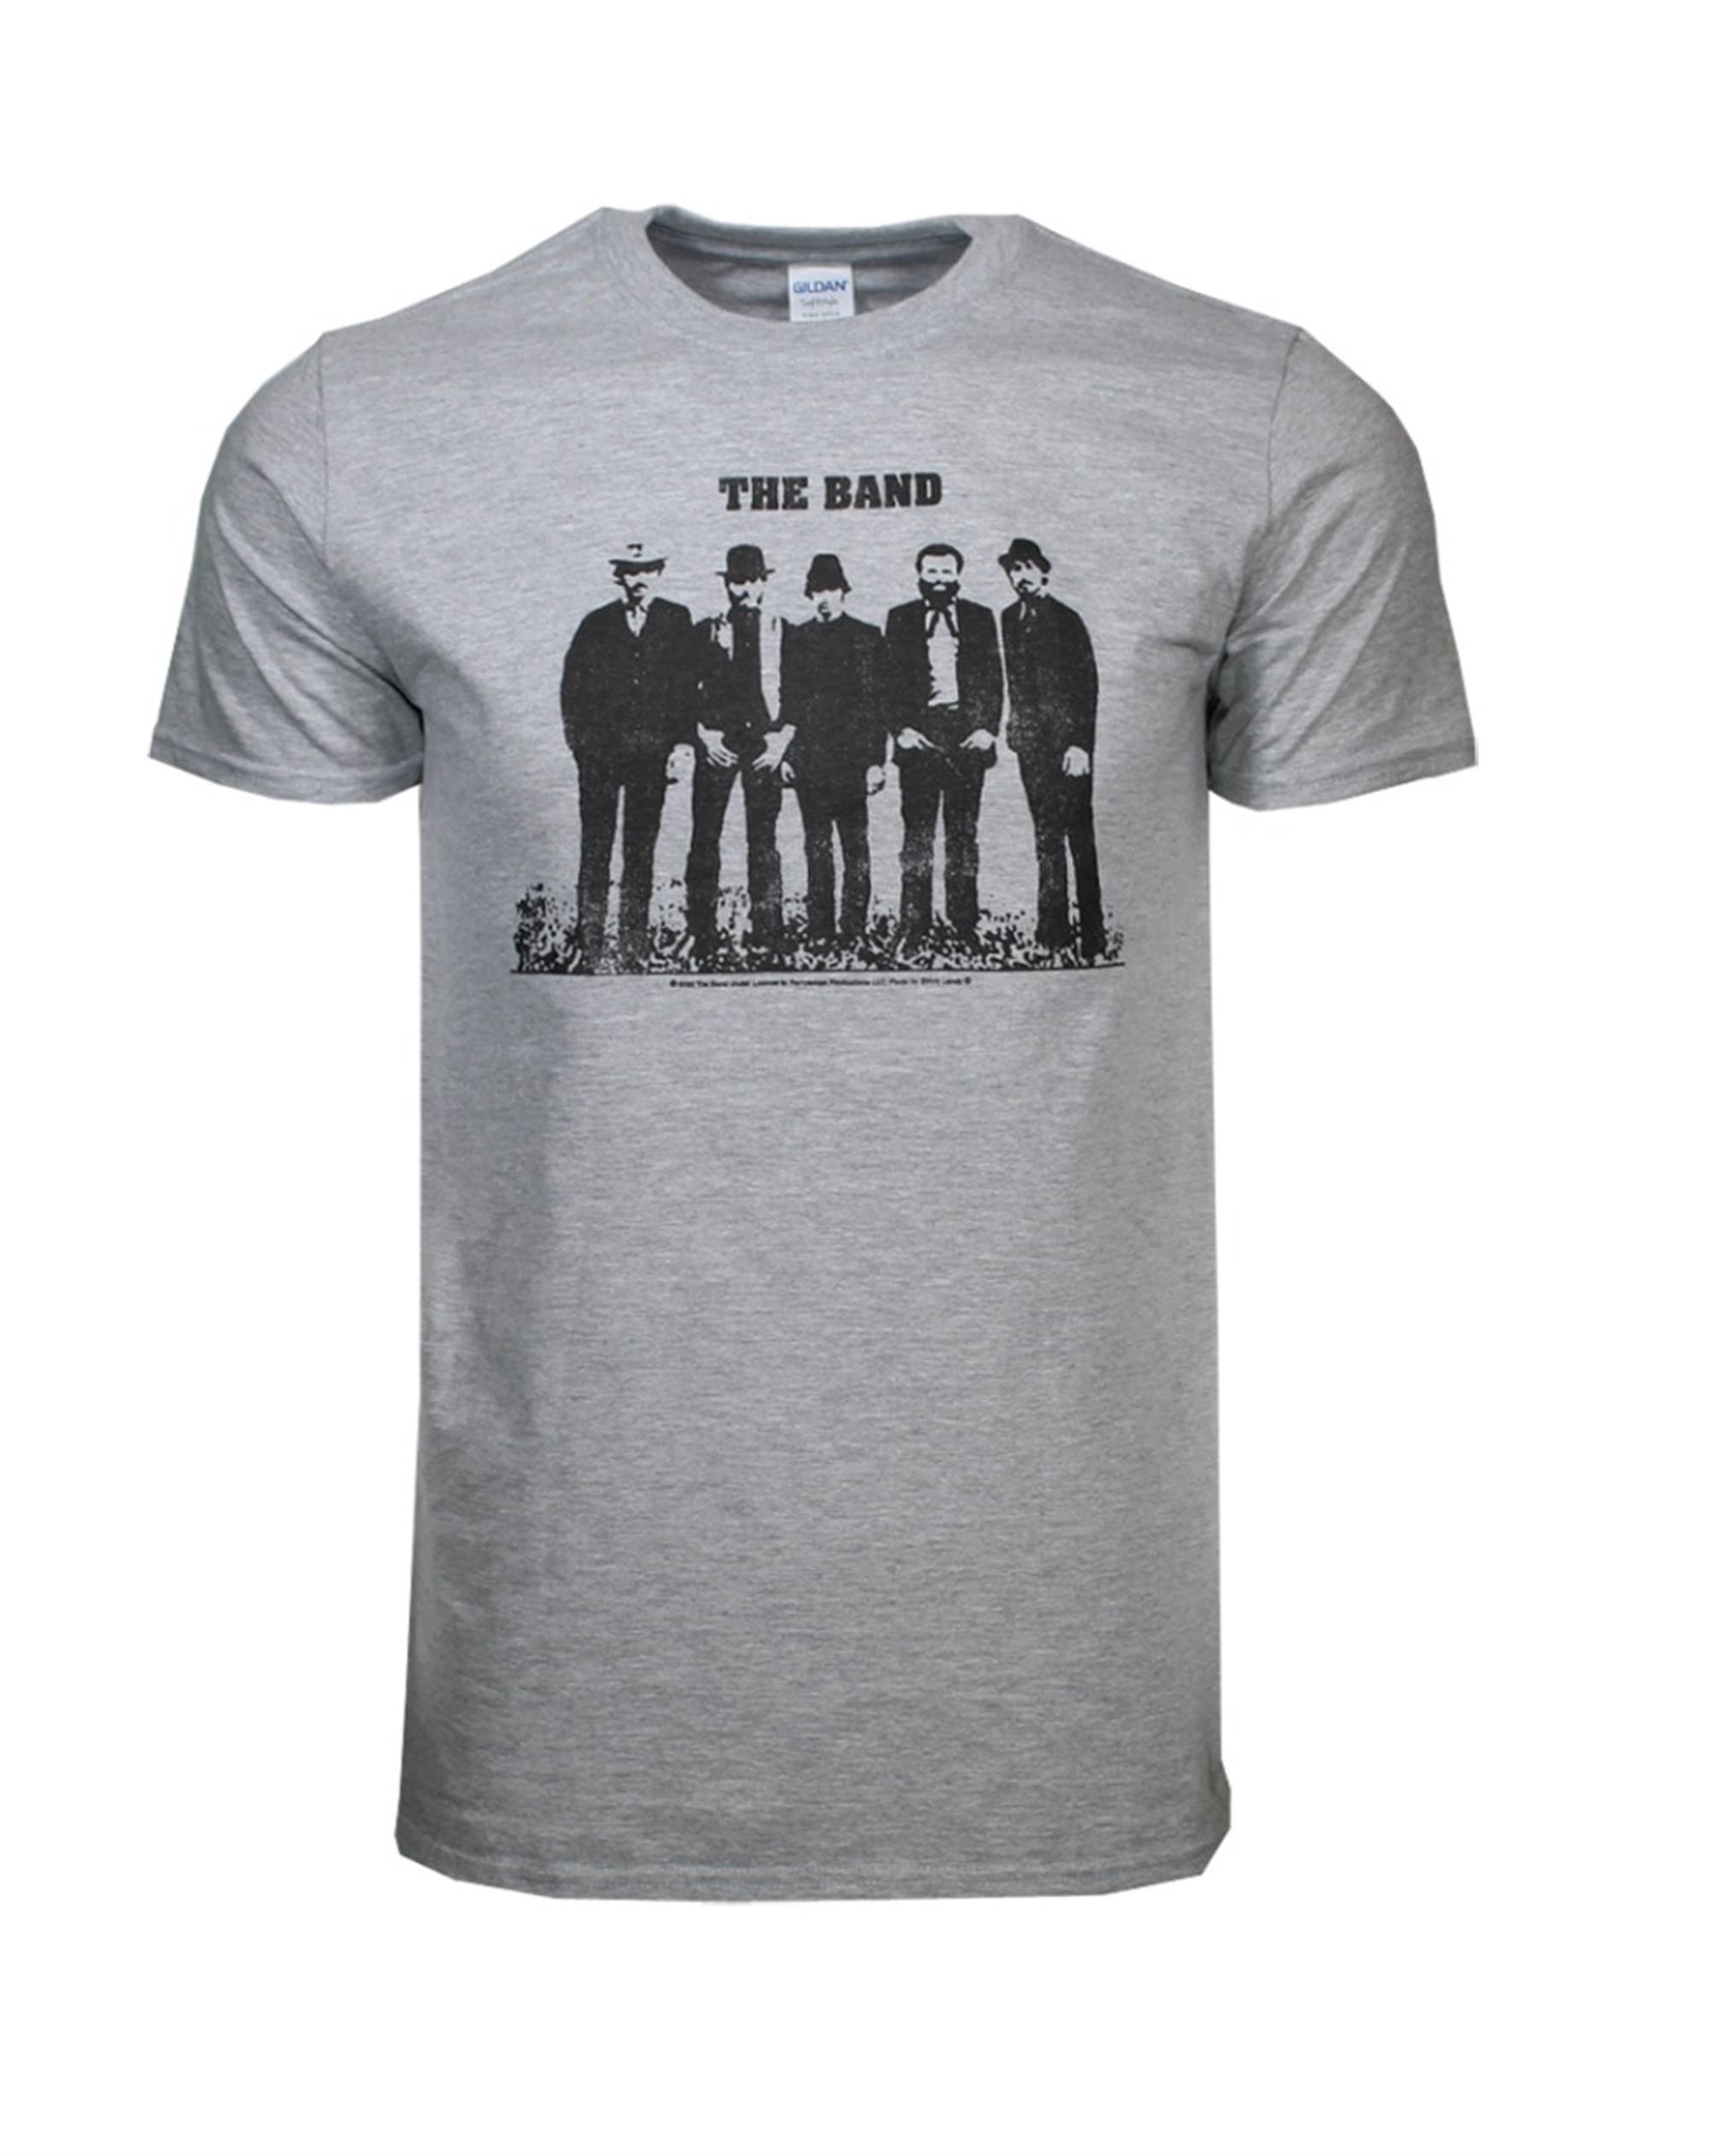 The Band Silhouette T-Shirt